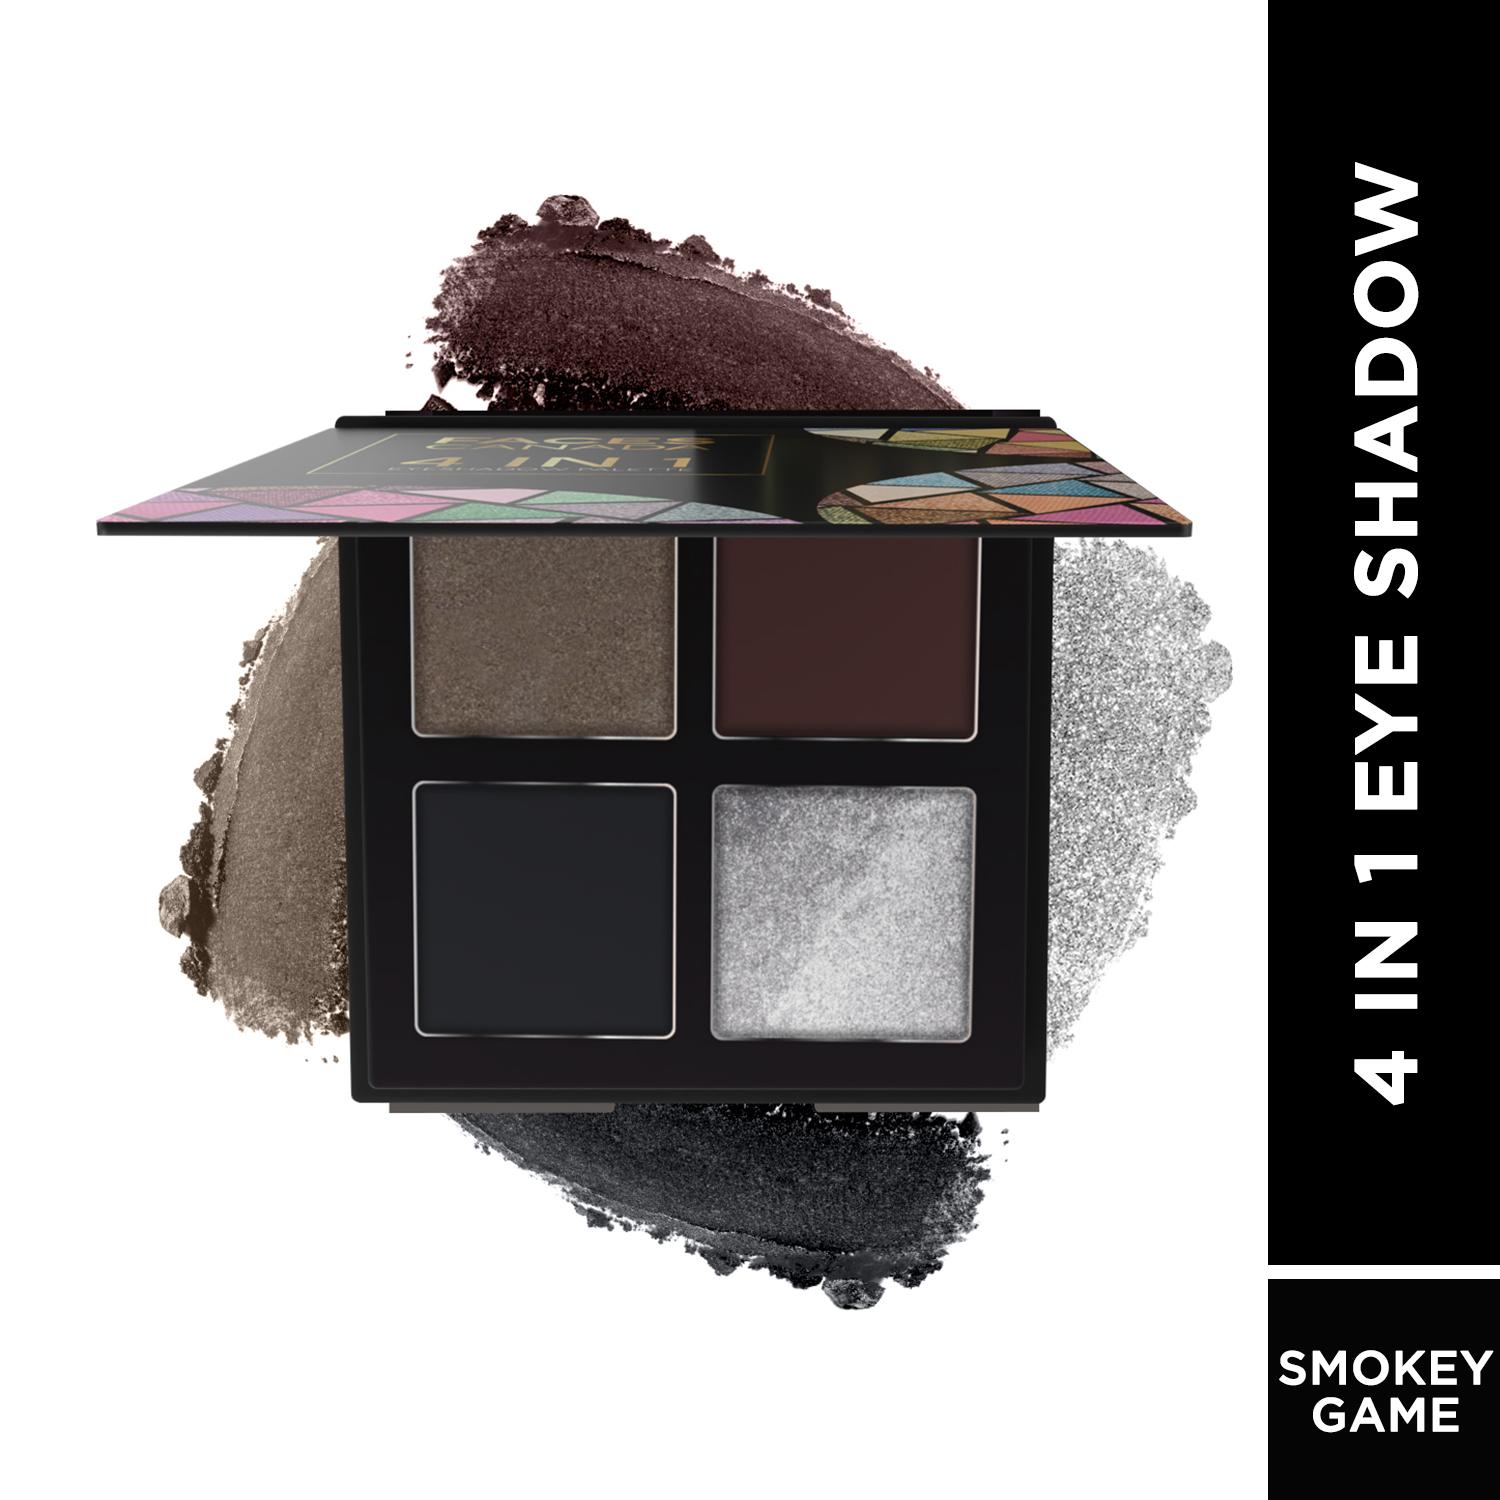 Faces Canada | Faces Canada 4 IN 1 Eyeshadow Palette - Smokey Game 07, Shimmer & Matte, Satin Matte Finish (4.8 g)